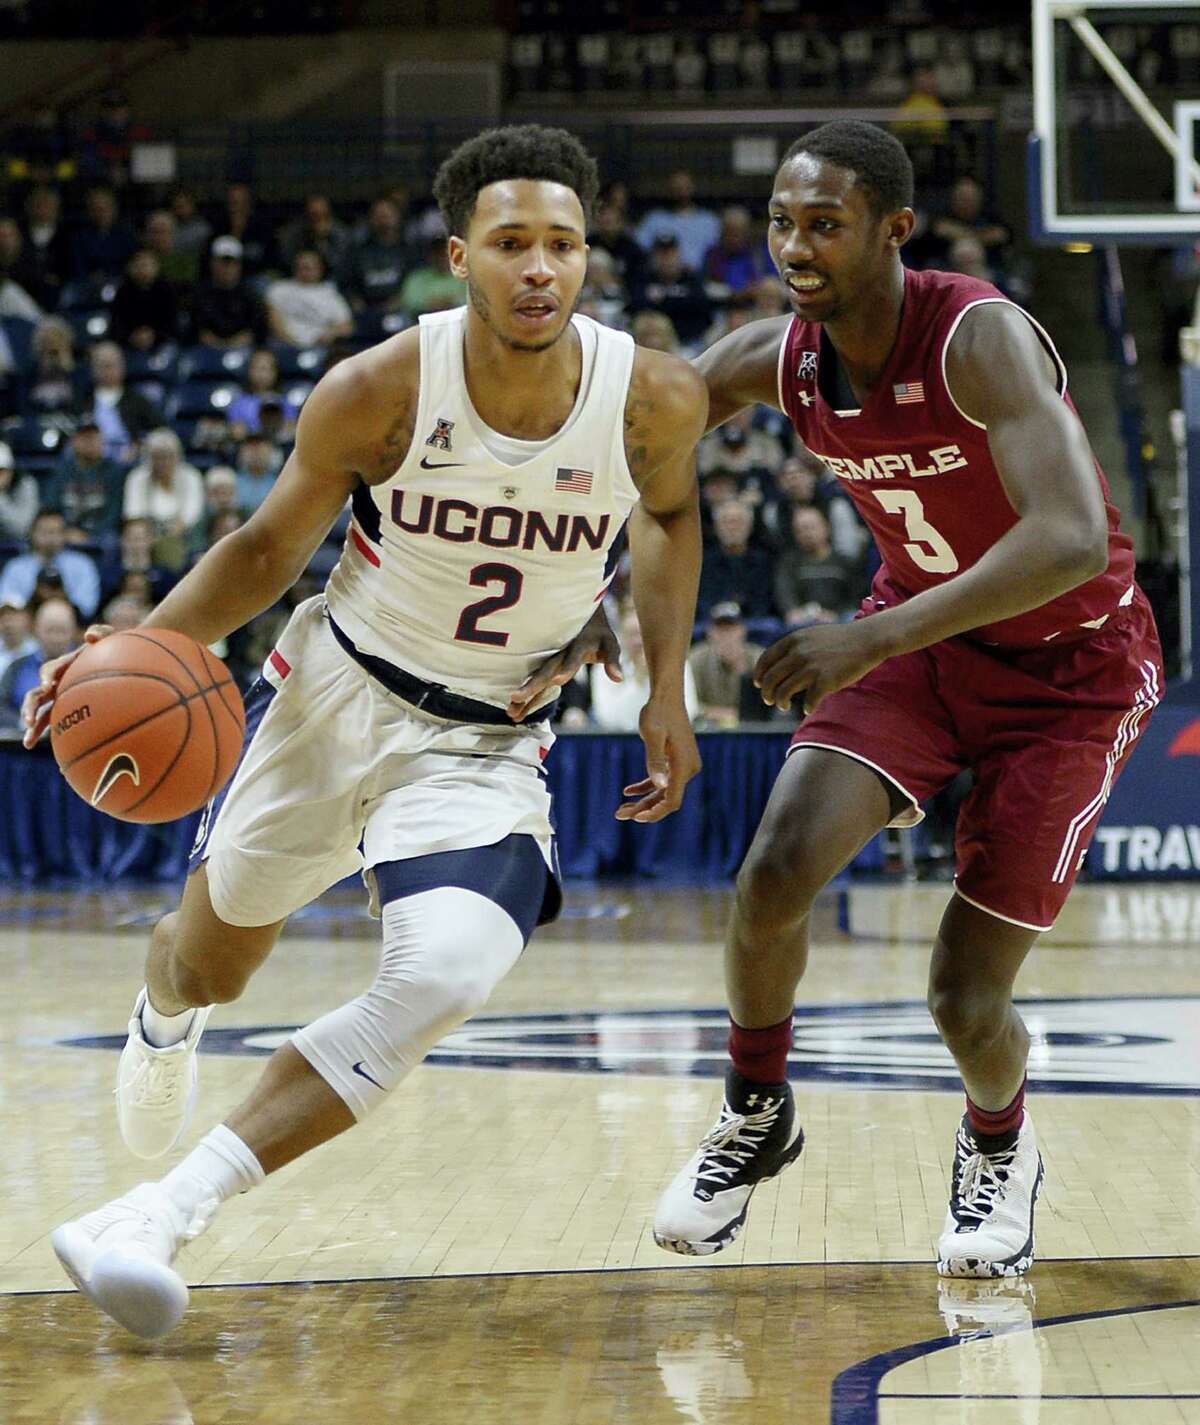 UConn’s Jalen Adams, left, dribbles around Temple’s Shizz Alston Jr. in the first half from action earlier this month. The Huskies play at SMU tonight.